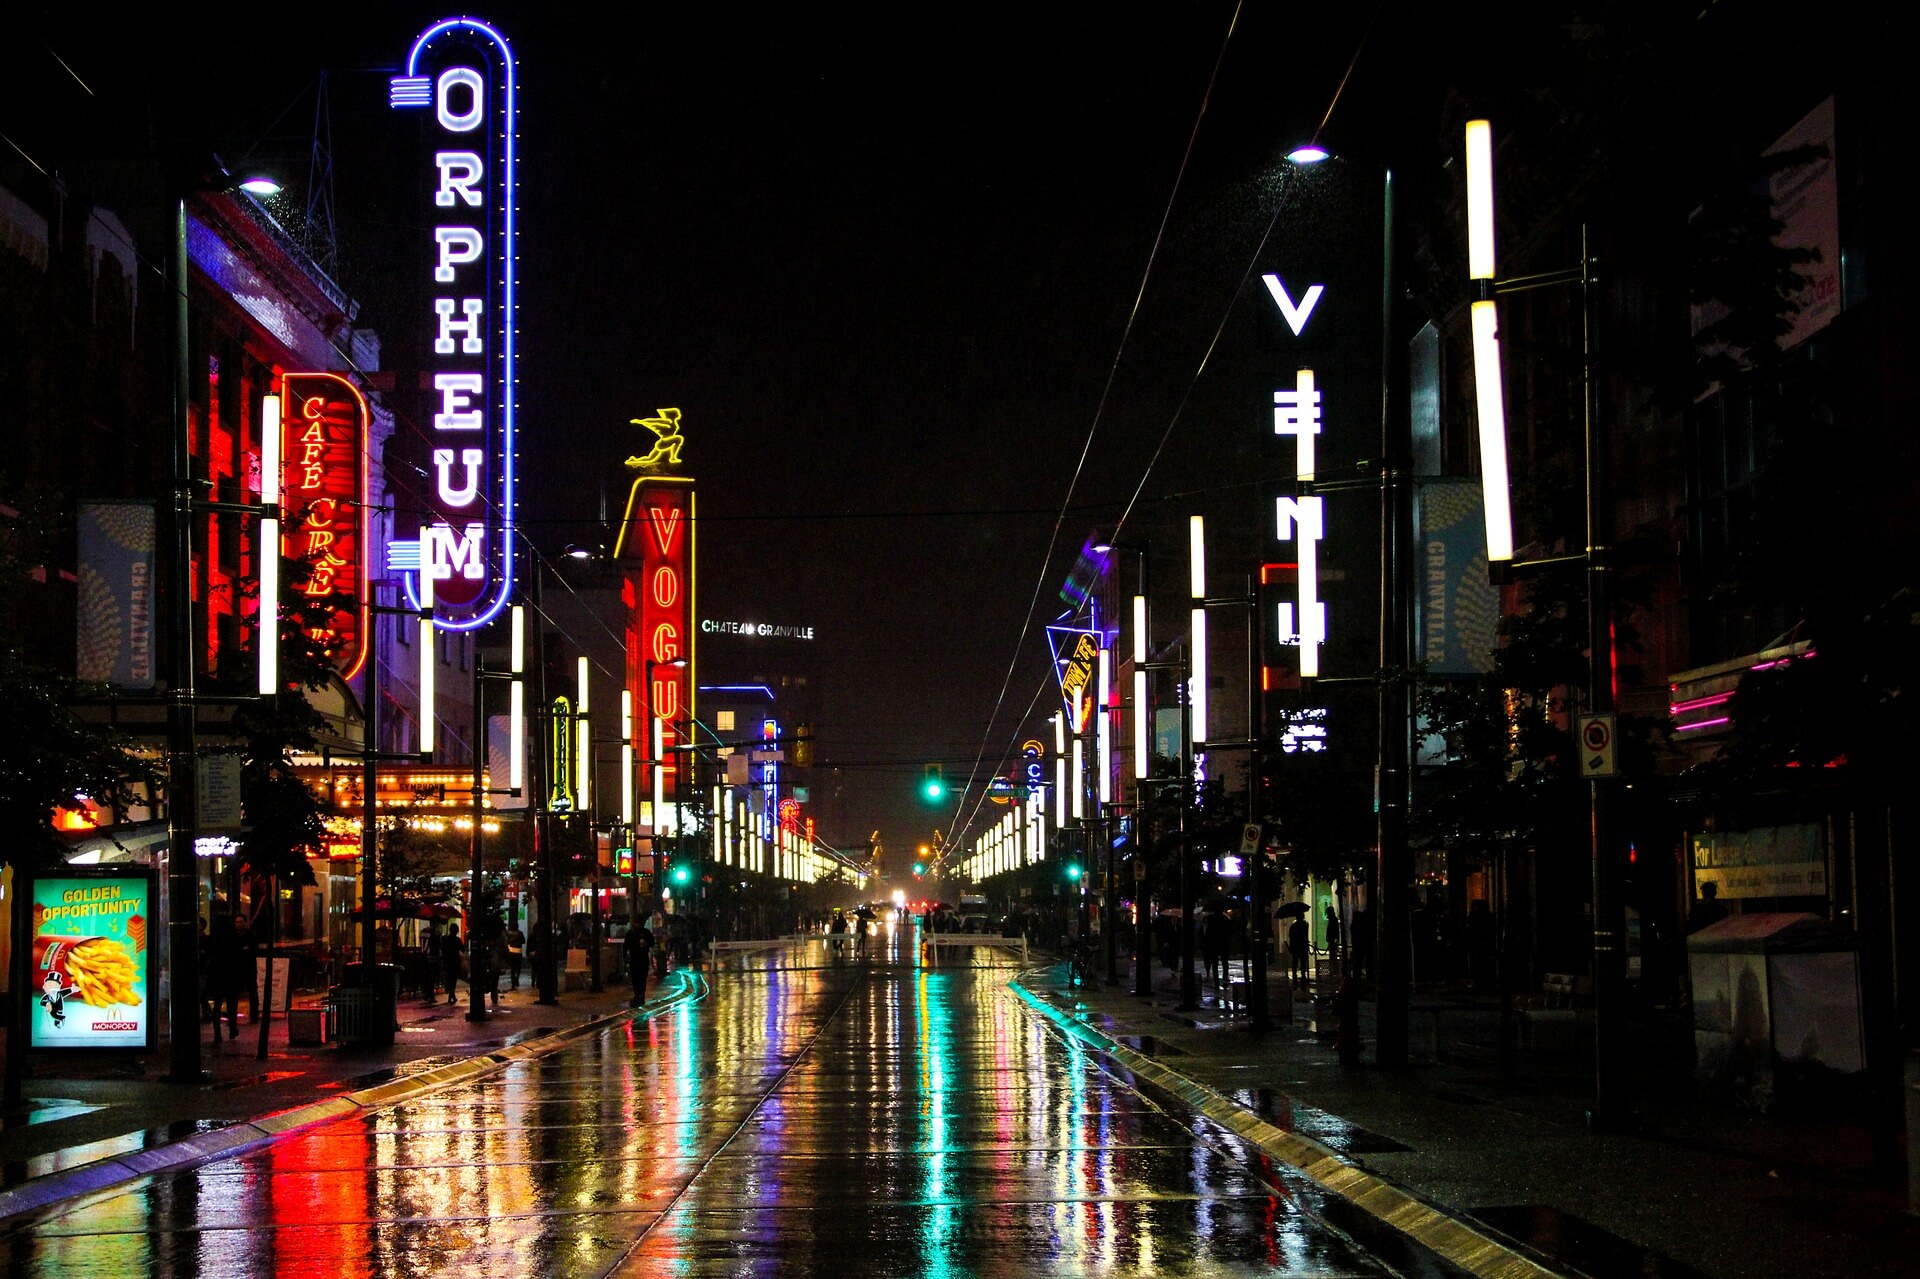 Granville Street in Vancouver, British Columbia, Canada, at night